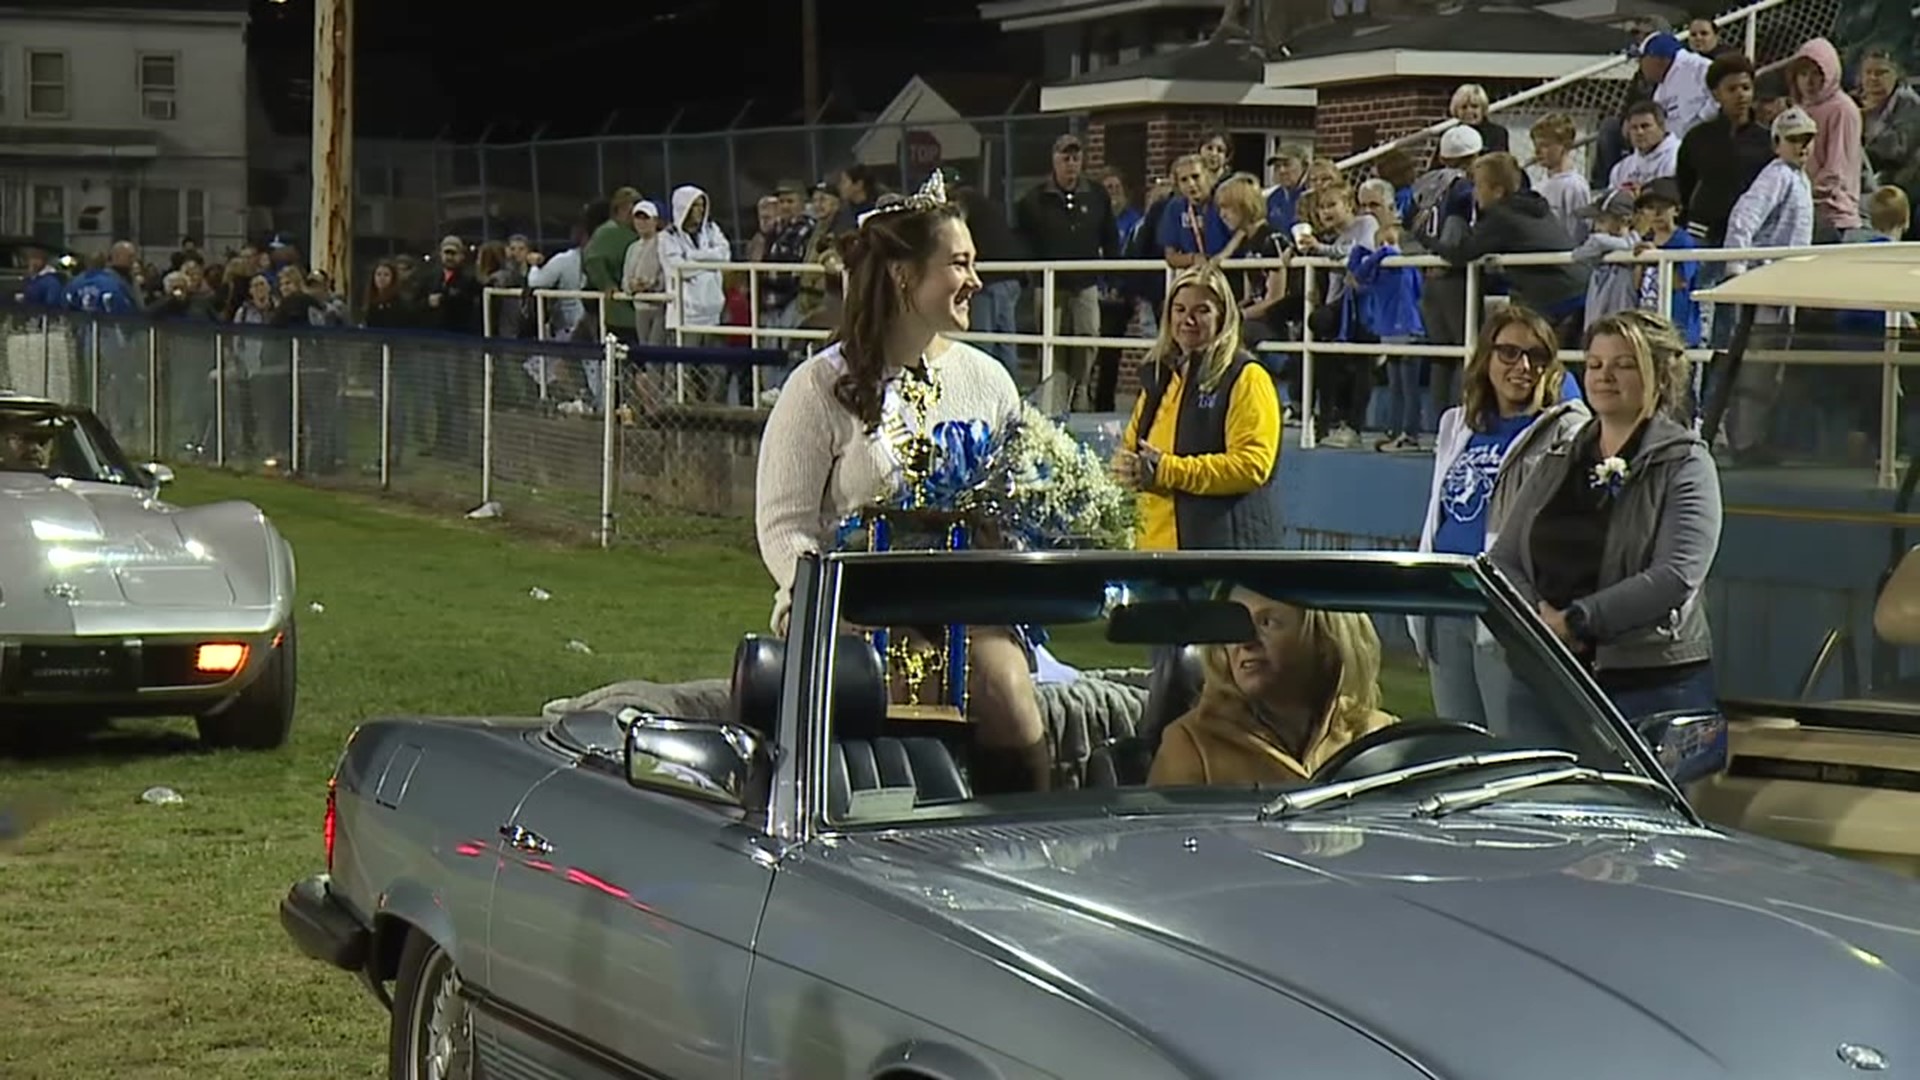 As many high schools celebrate homecoming, the race for queen looks different at a school in Schuylkill County.